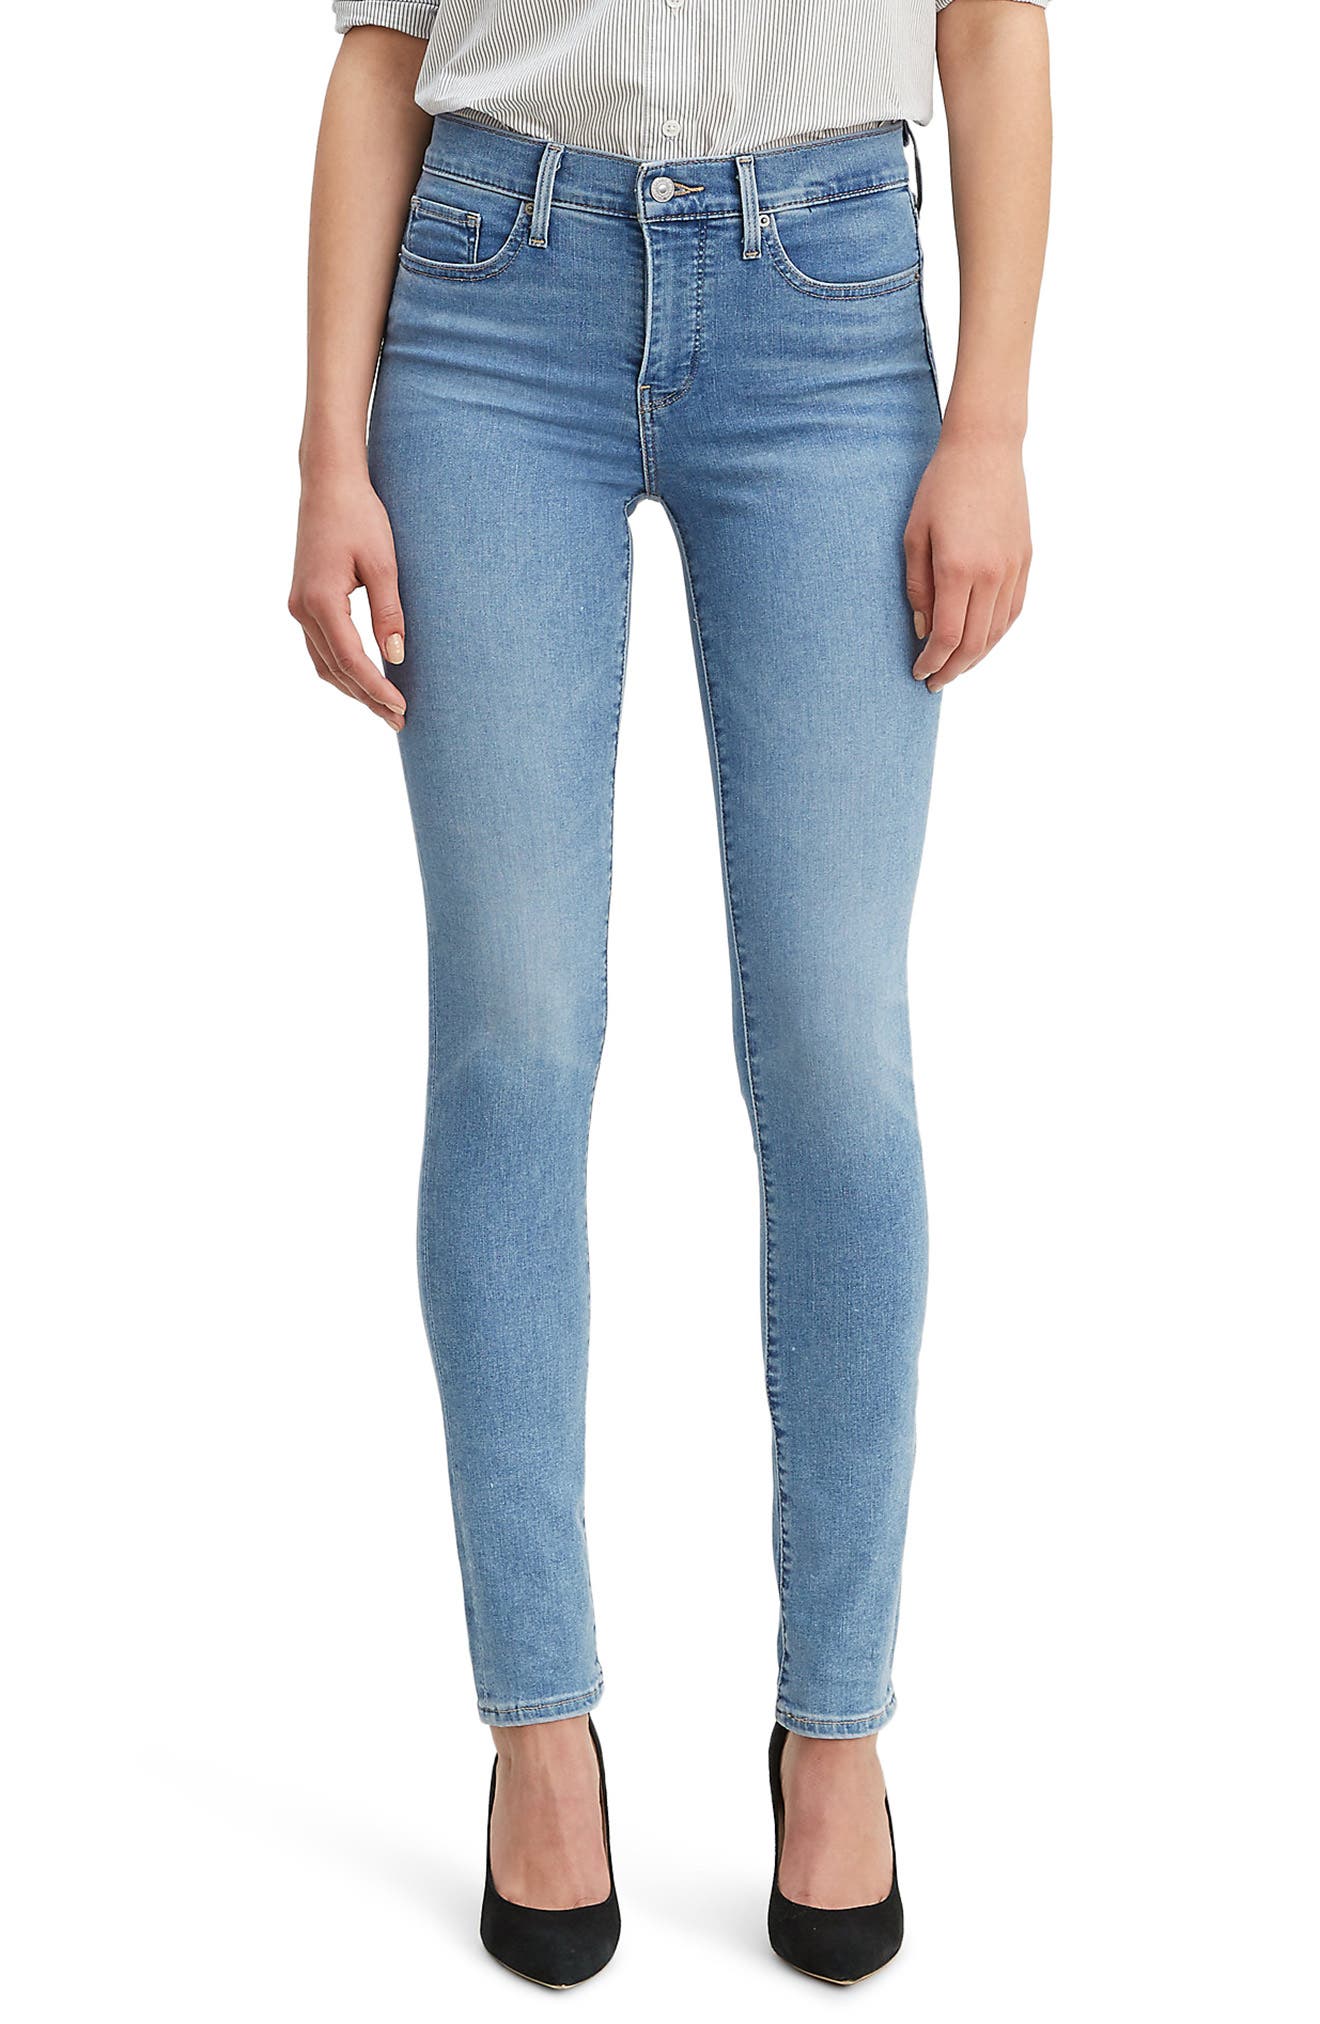 levi's 311 shaping skinny jeans review 